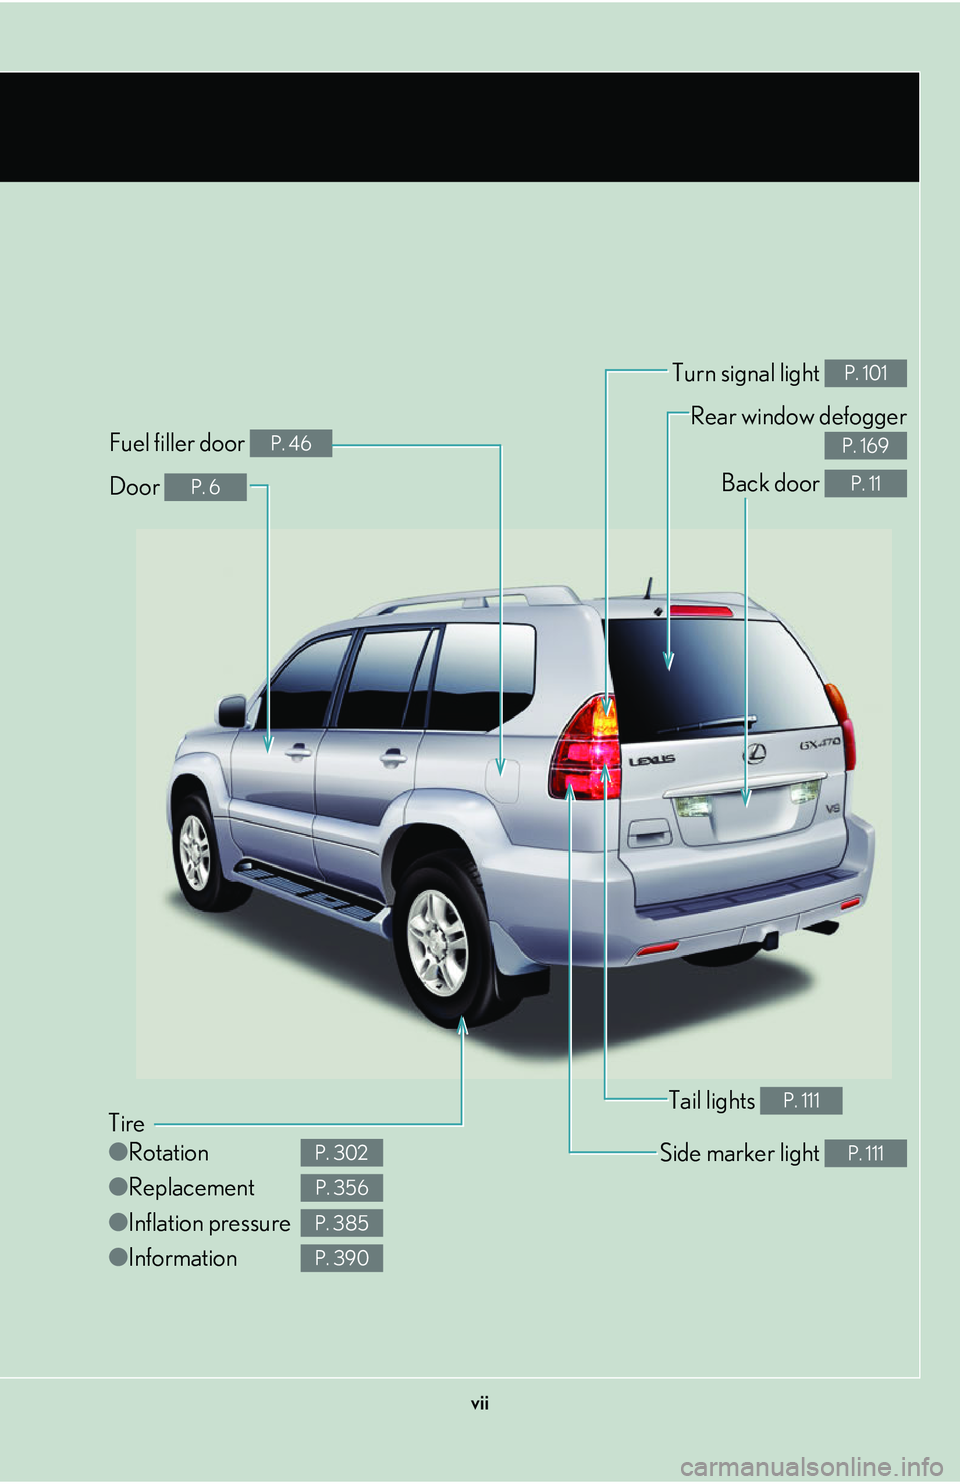 Lexus GX470 2007  Air Conditioning / LEXUS 2007 GX470 OWNERS MANUAL (OM60C64U) vii
Tire
●Rotation
● Replacement
● Inflation pressure
● Information
P. 302
P. 356
P. 385
P. 390
Tail lights P. 111
Side marker light P. 111
Back door P. 11
Rear window defogger
 
P. 169
Door P